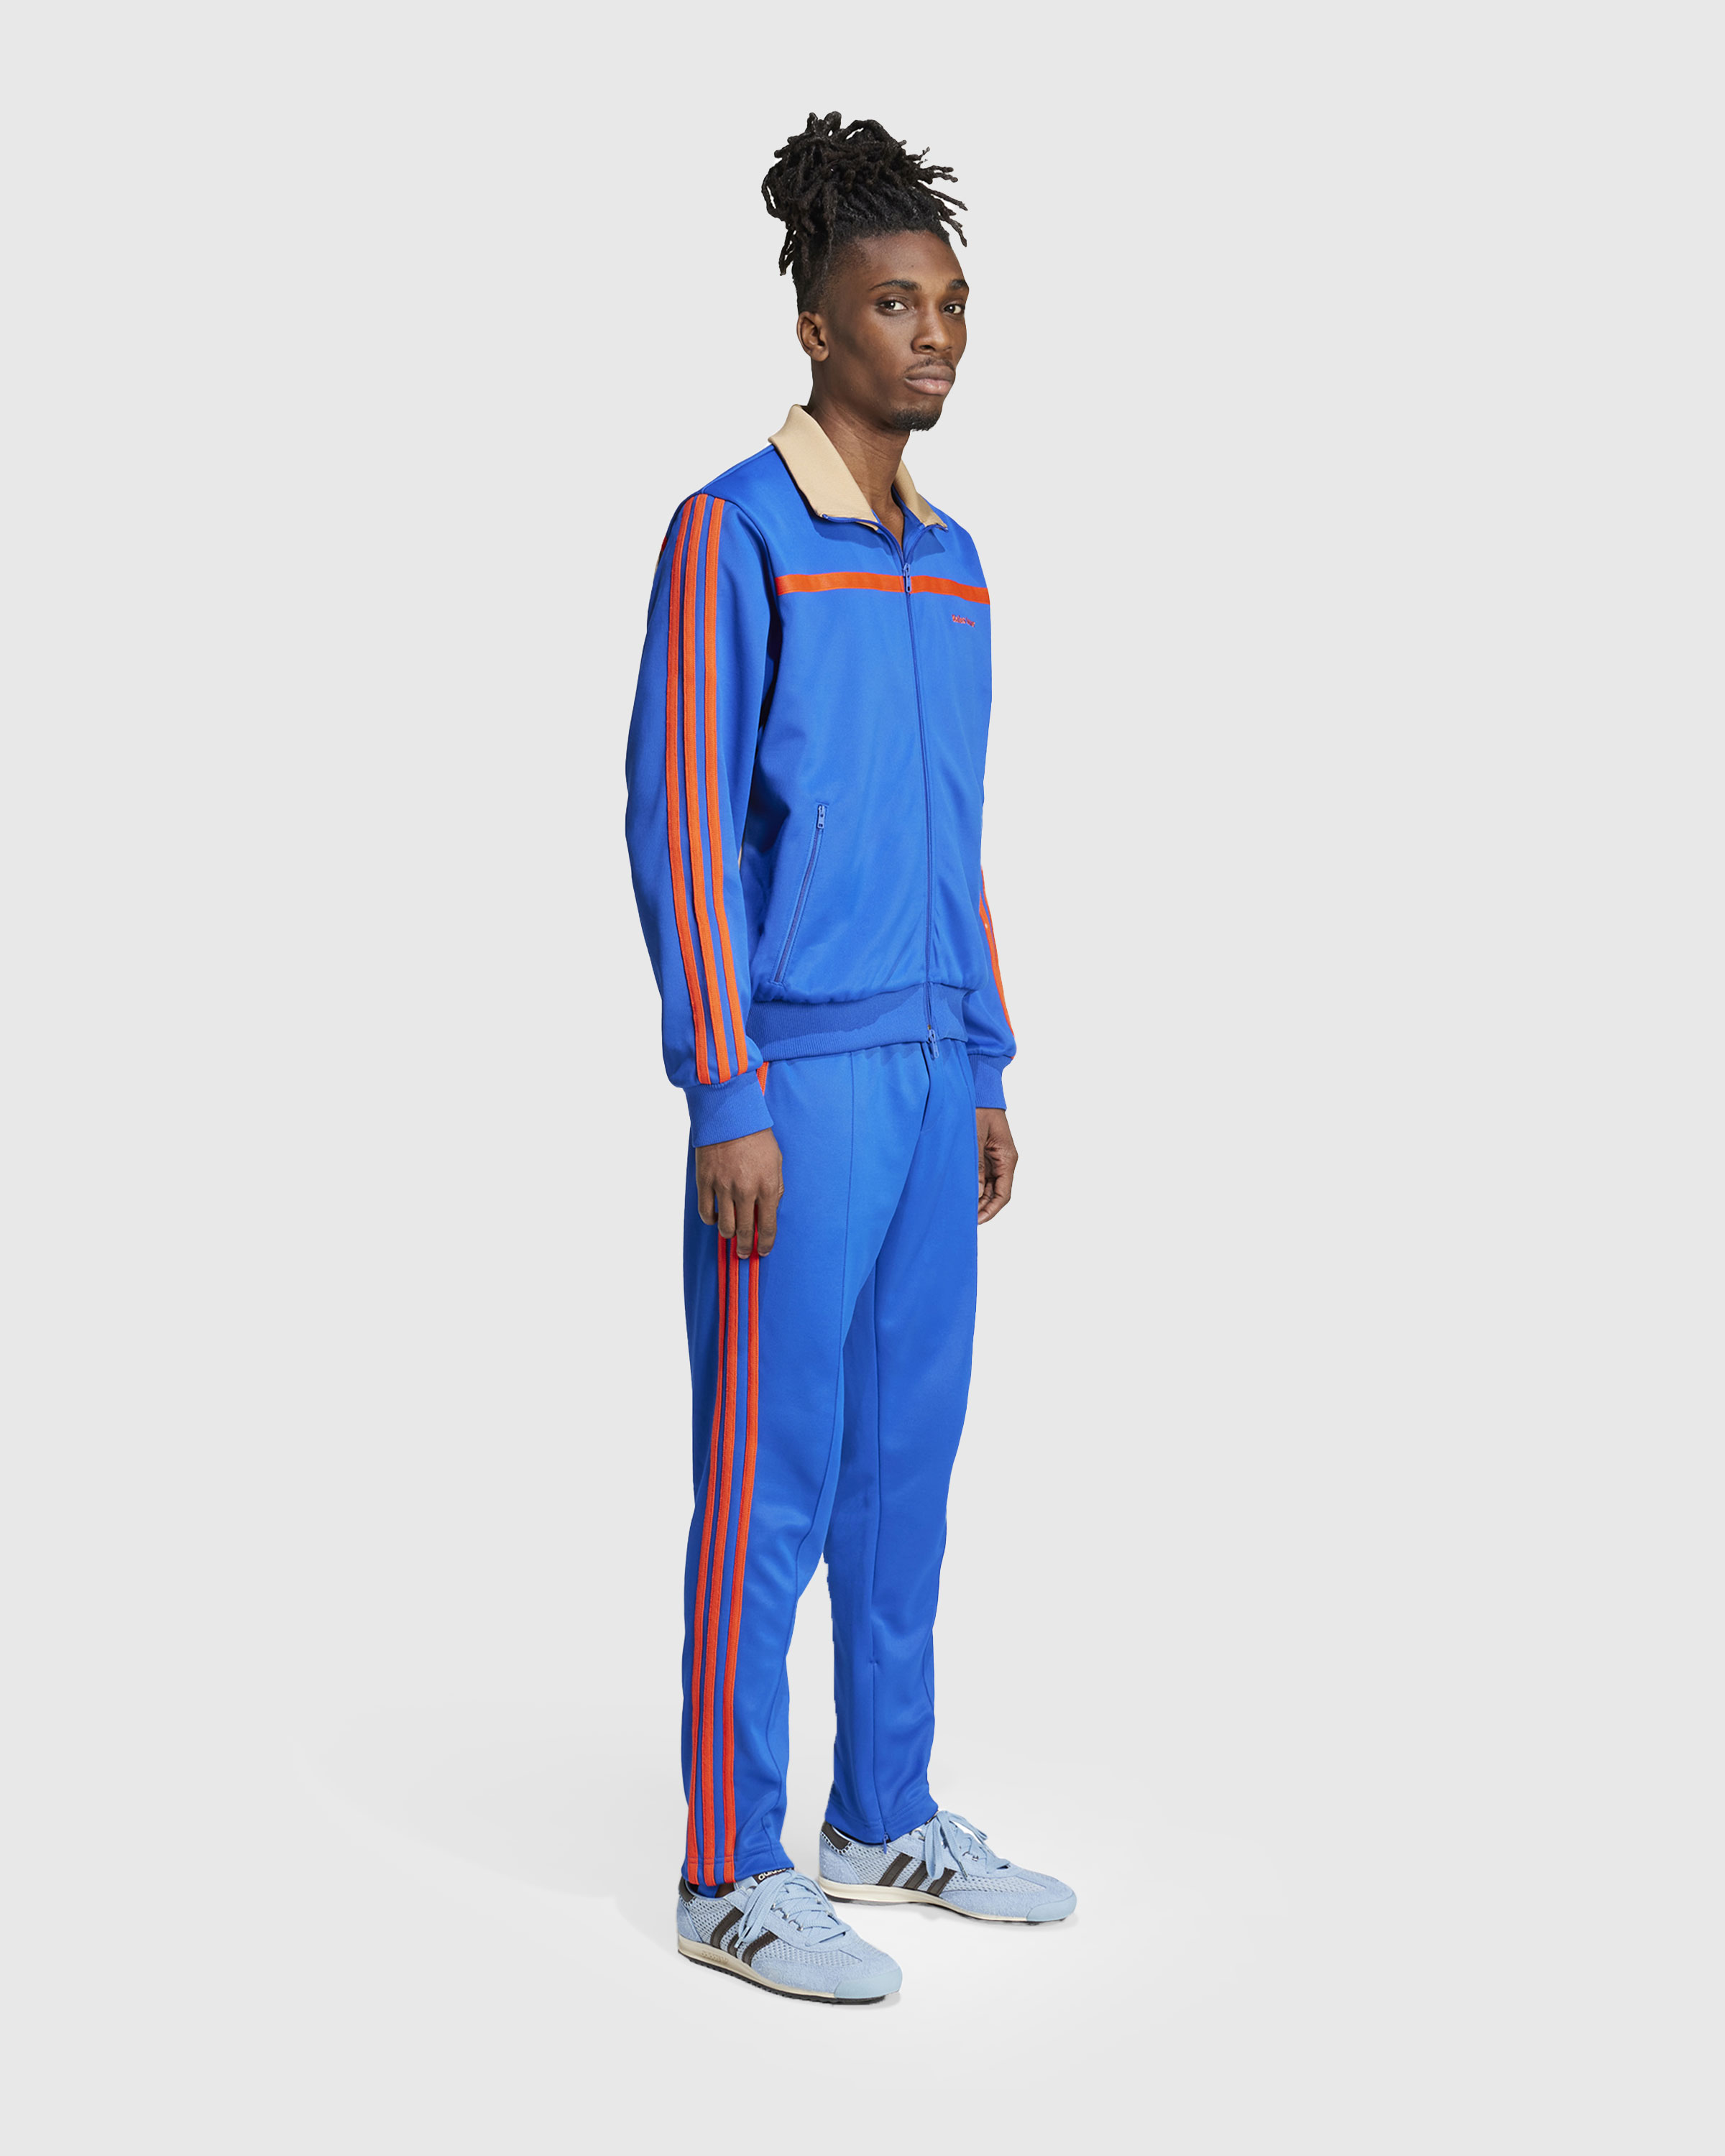 Adidas x Wales Bonner – Jersey Track Top Royal Blue - Track Jackets - Blue - Image 3